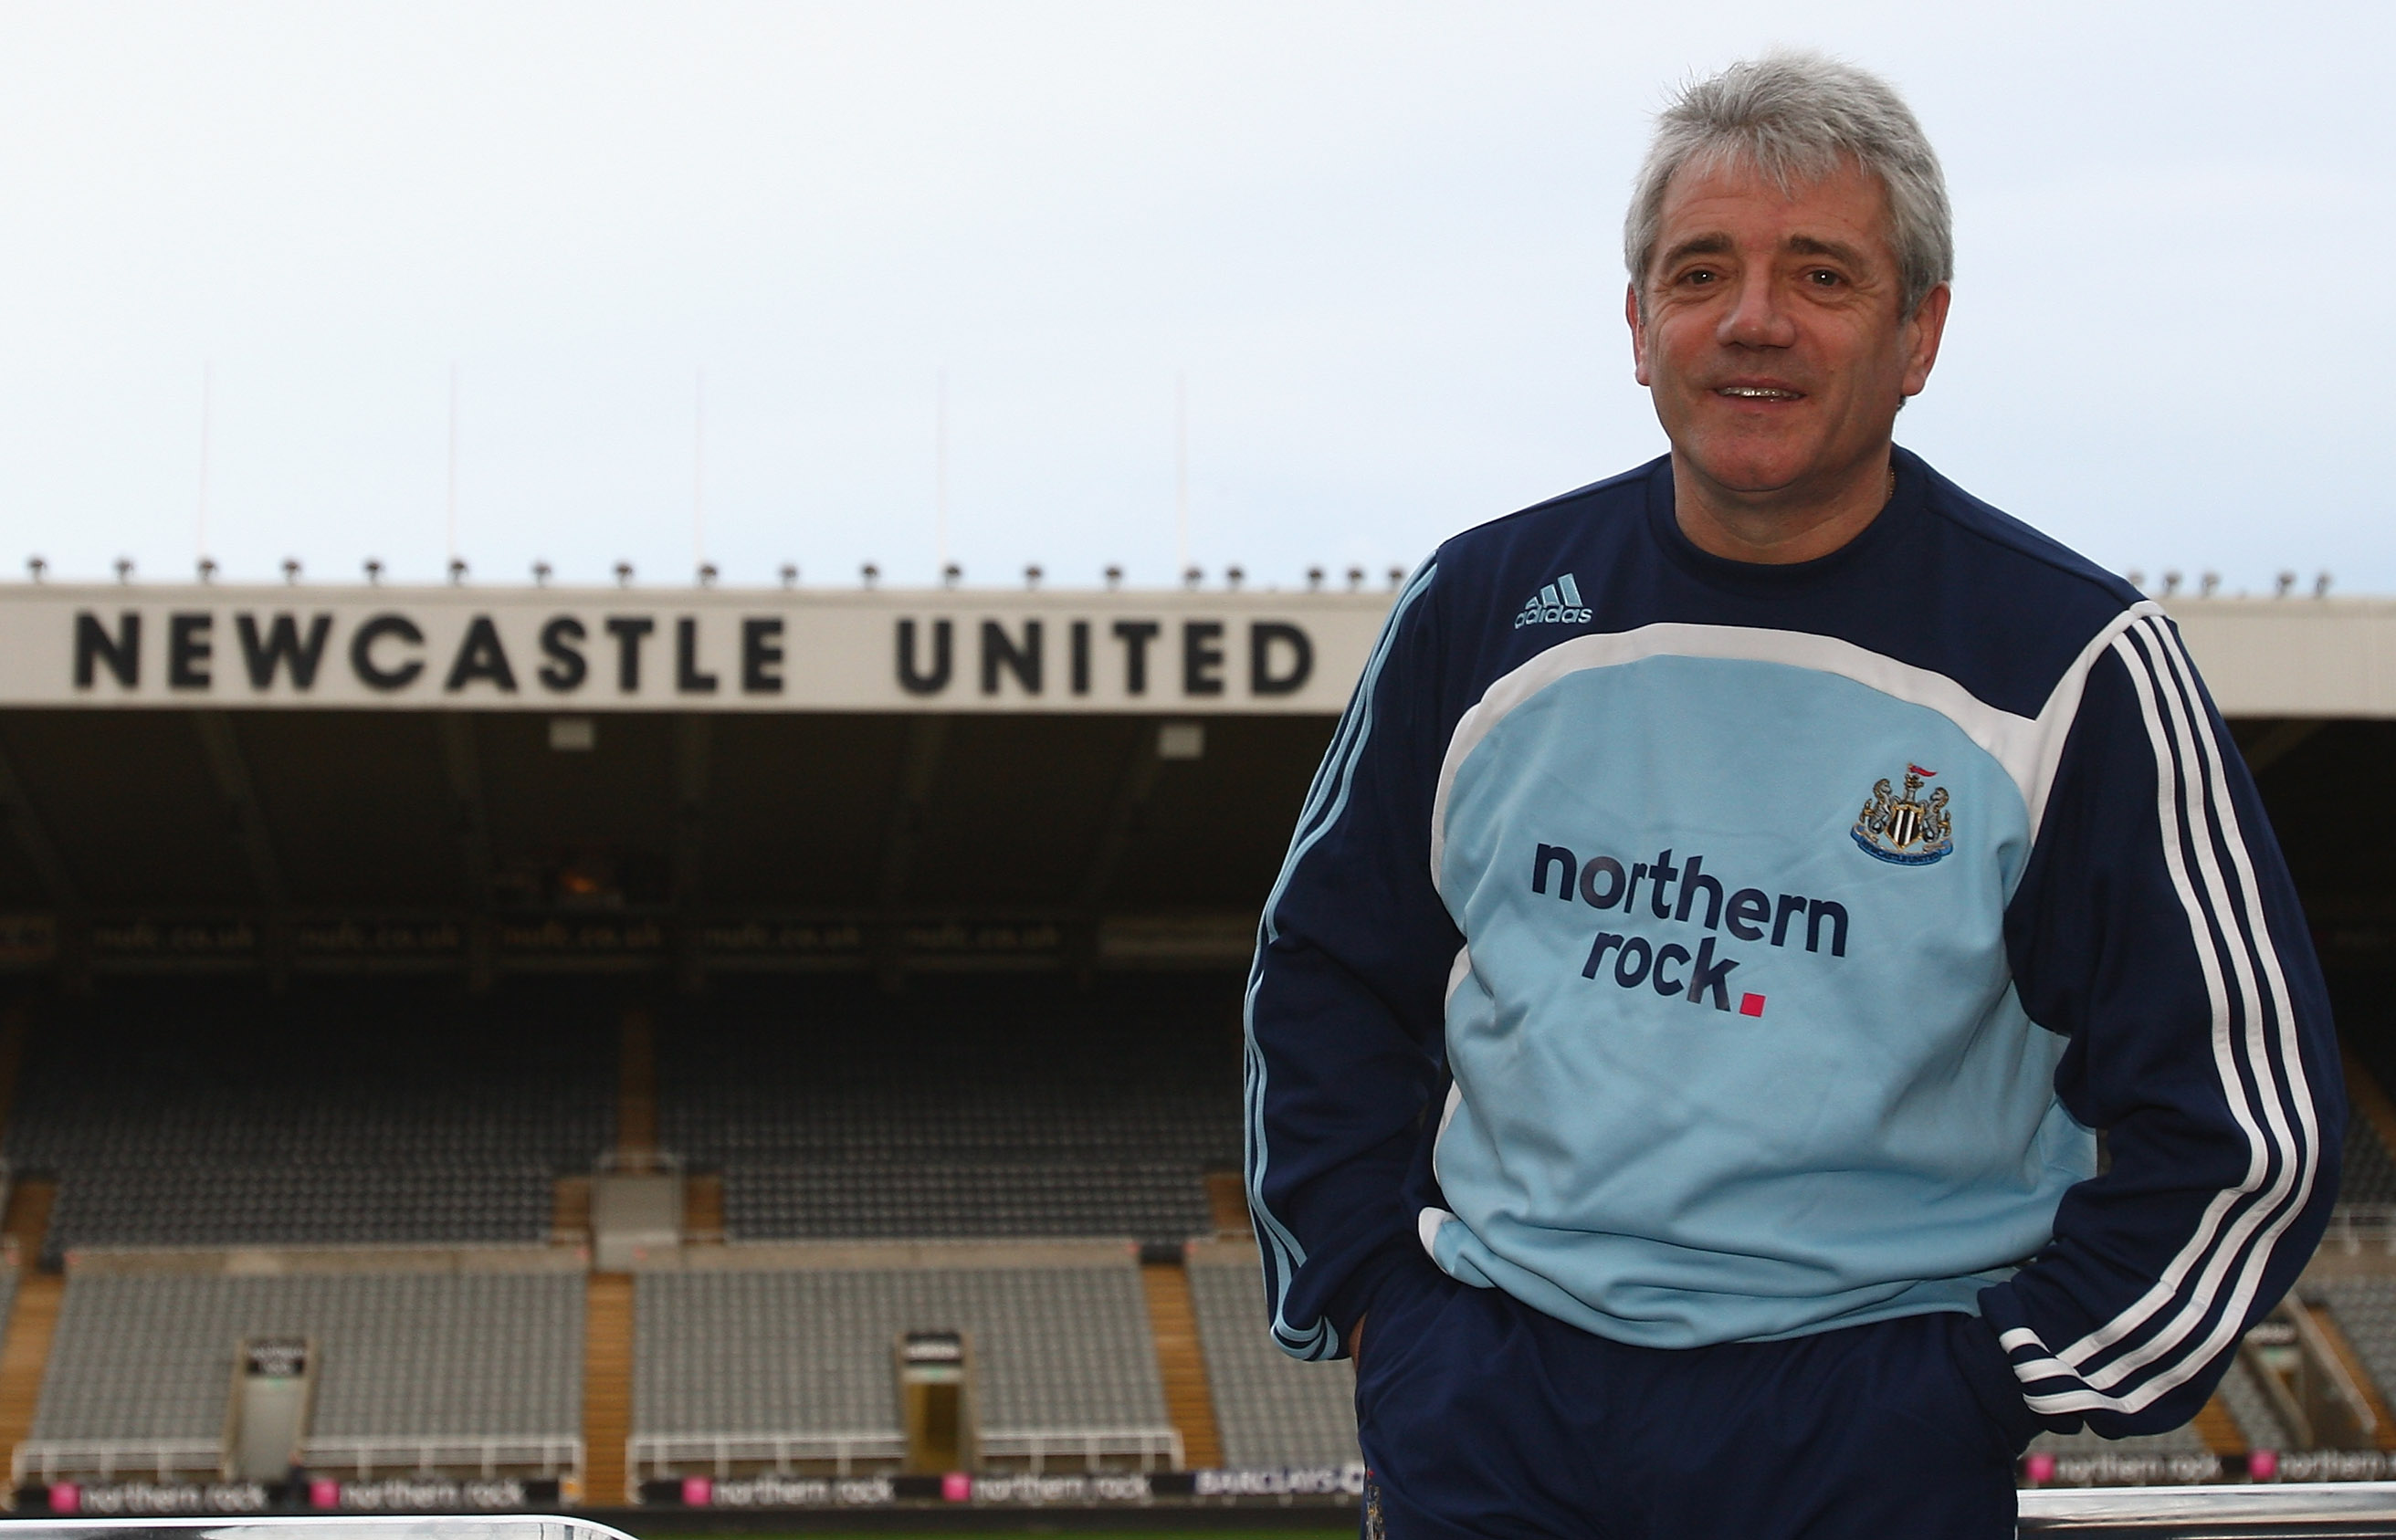 Keegan had two spells as Newcastle manager, including building the famous 'Entertainers' side of the 1990s